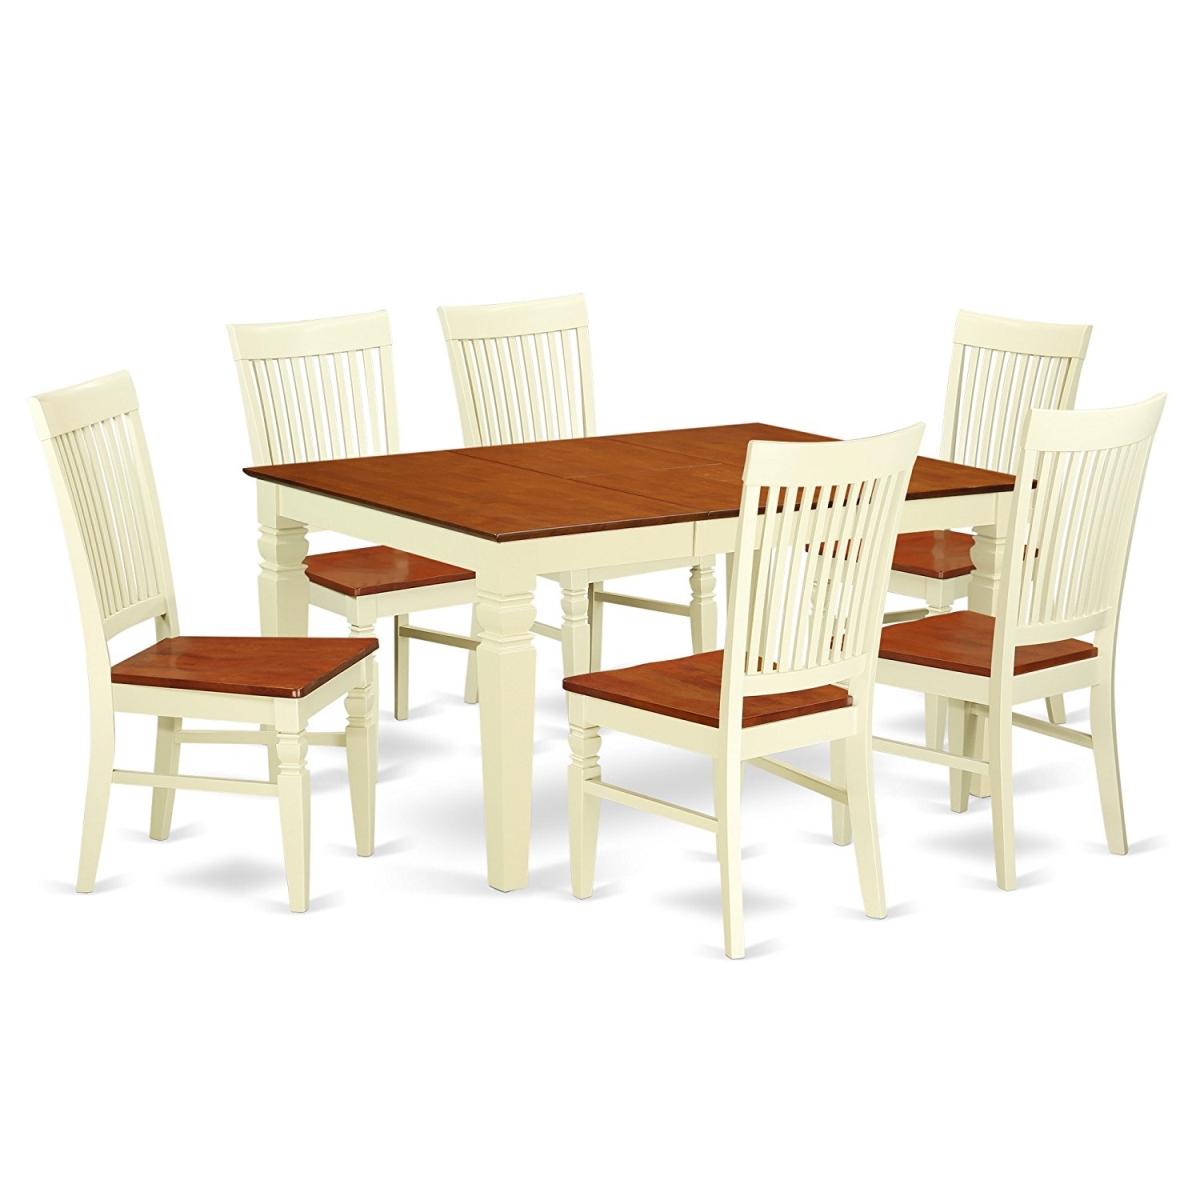 WEST7-BMK-W Rectangle Table & 6 Wood Seat Dinette, 7 piece - Buttermilk & Cherry -  East West Furniture